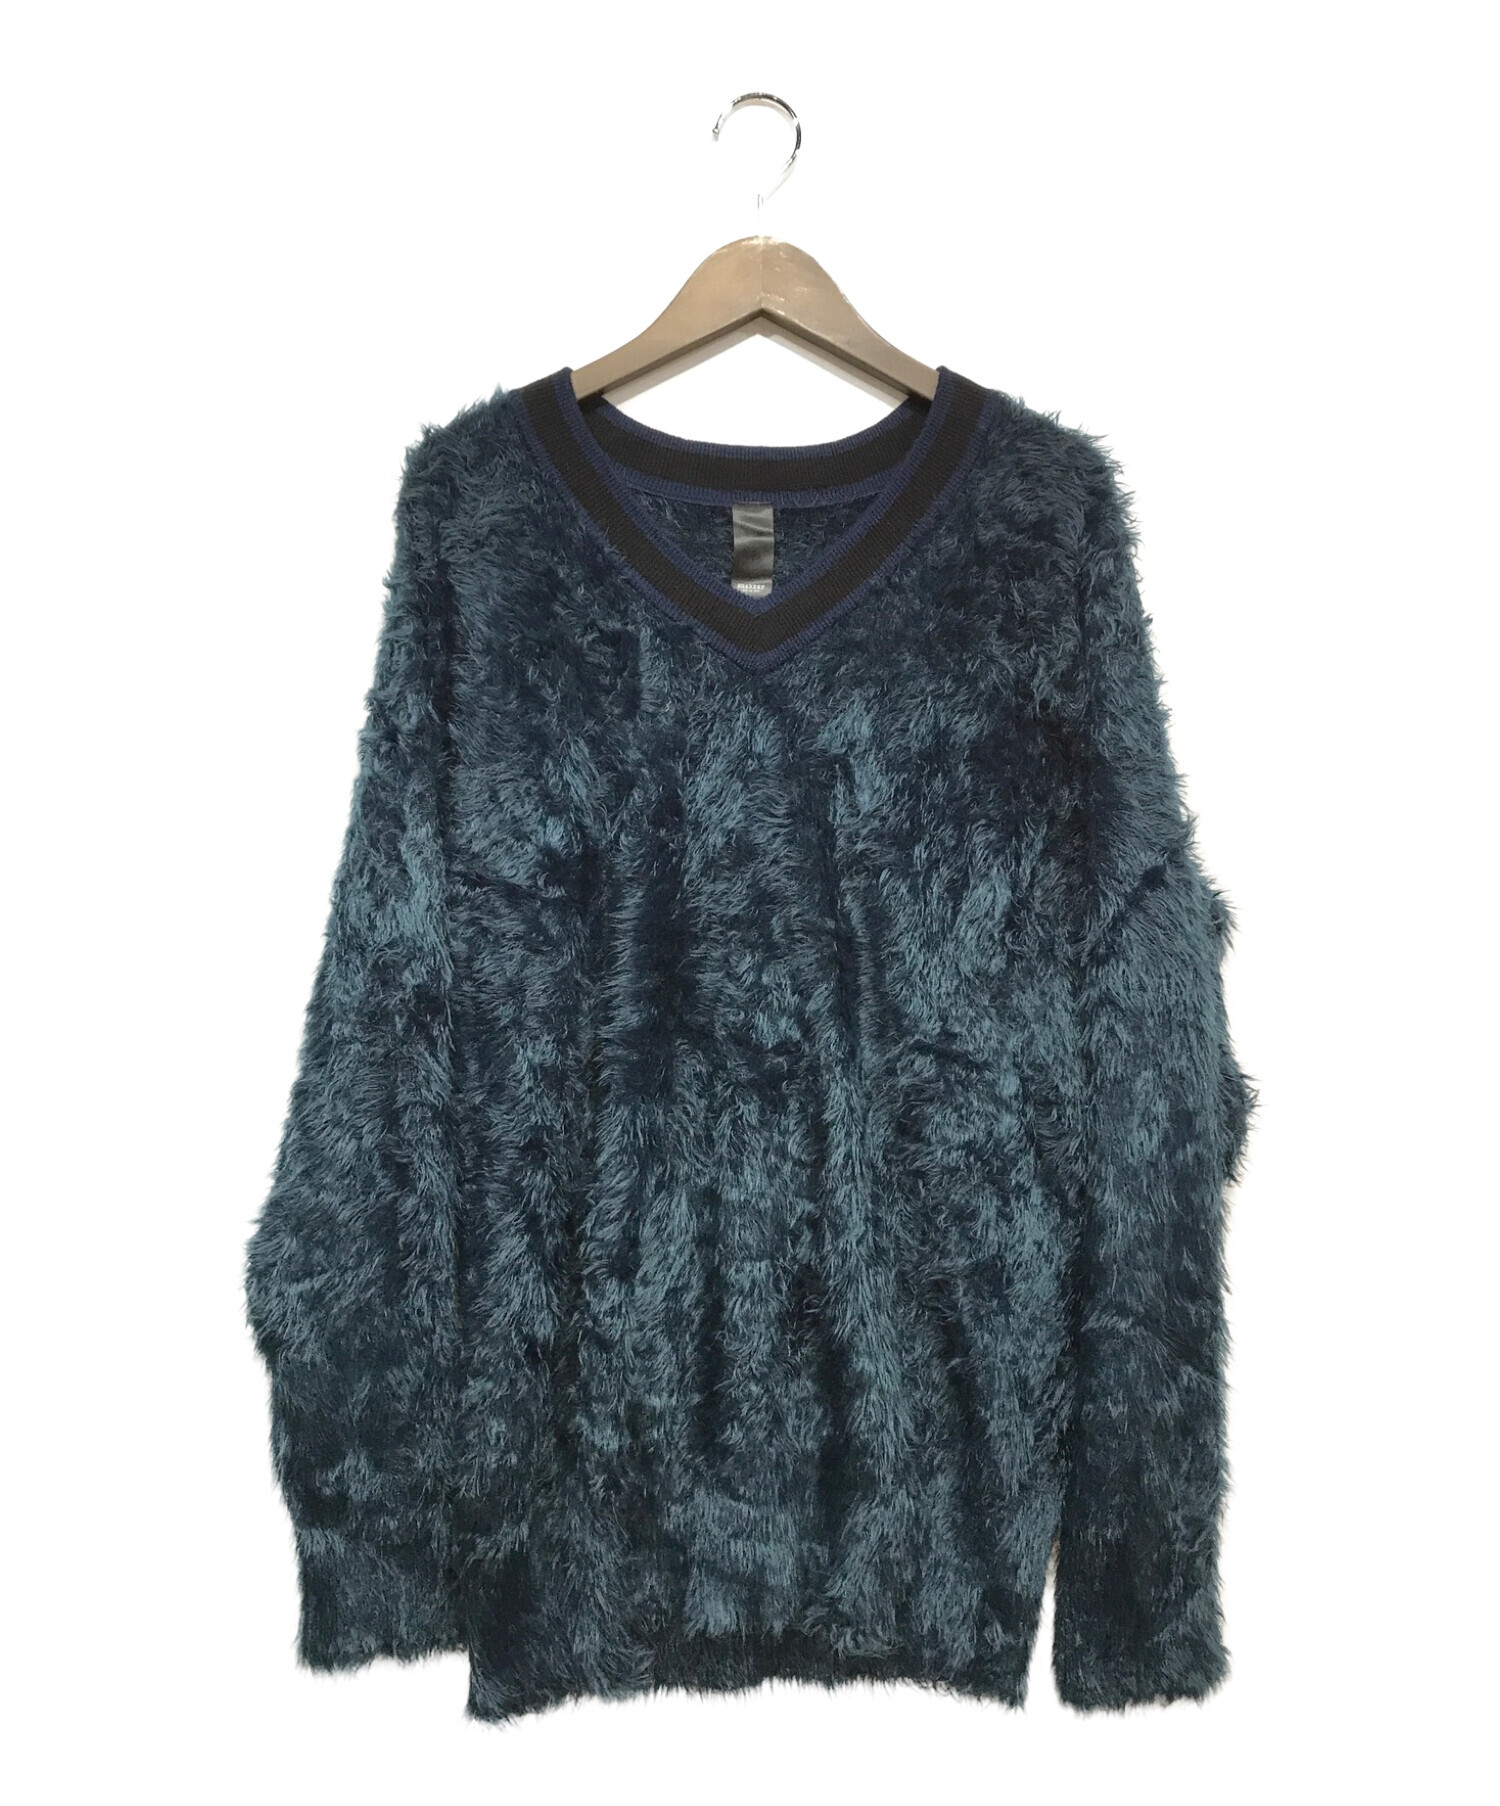 LONG SHAGGY PULL-OVER size1